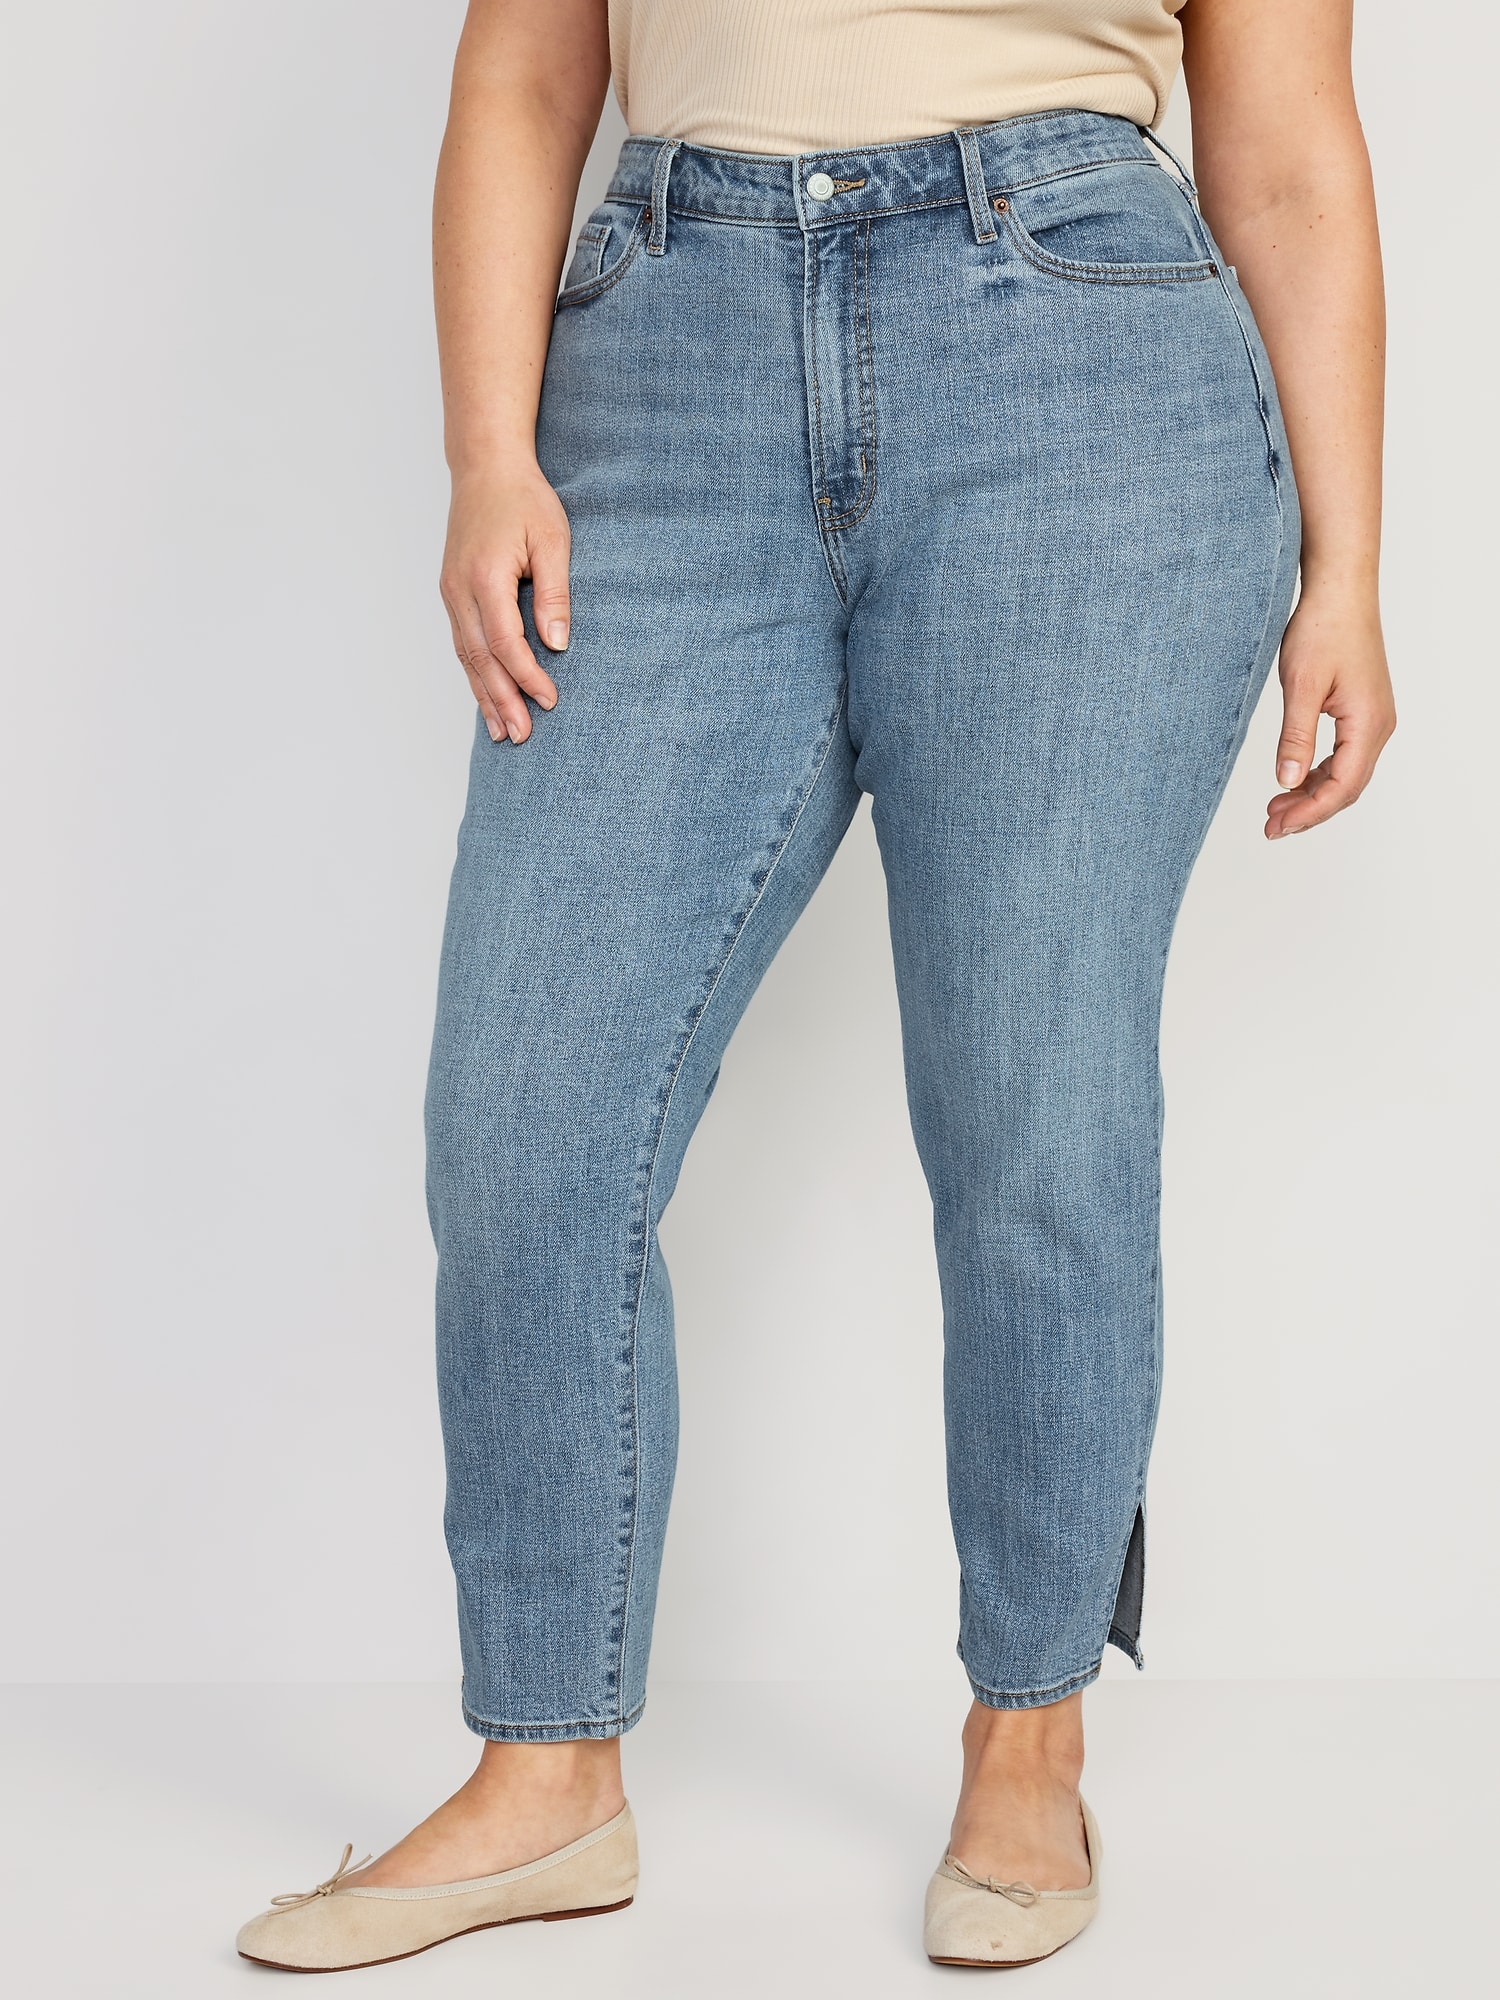 Curvy High-Waisted O.G. Straight Side-Split Jeans for Women | Old Navy